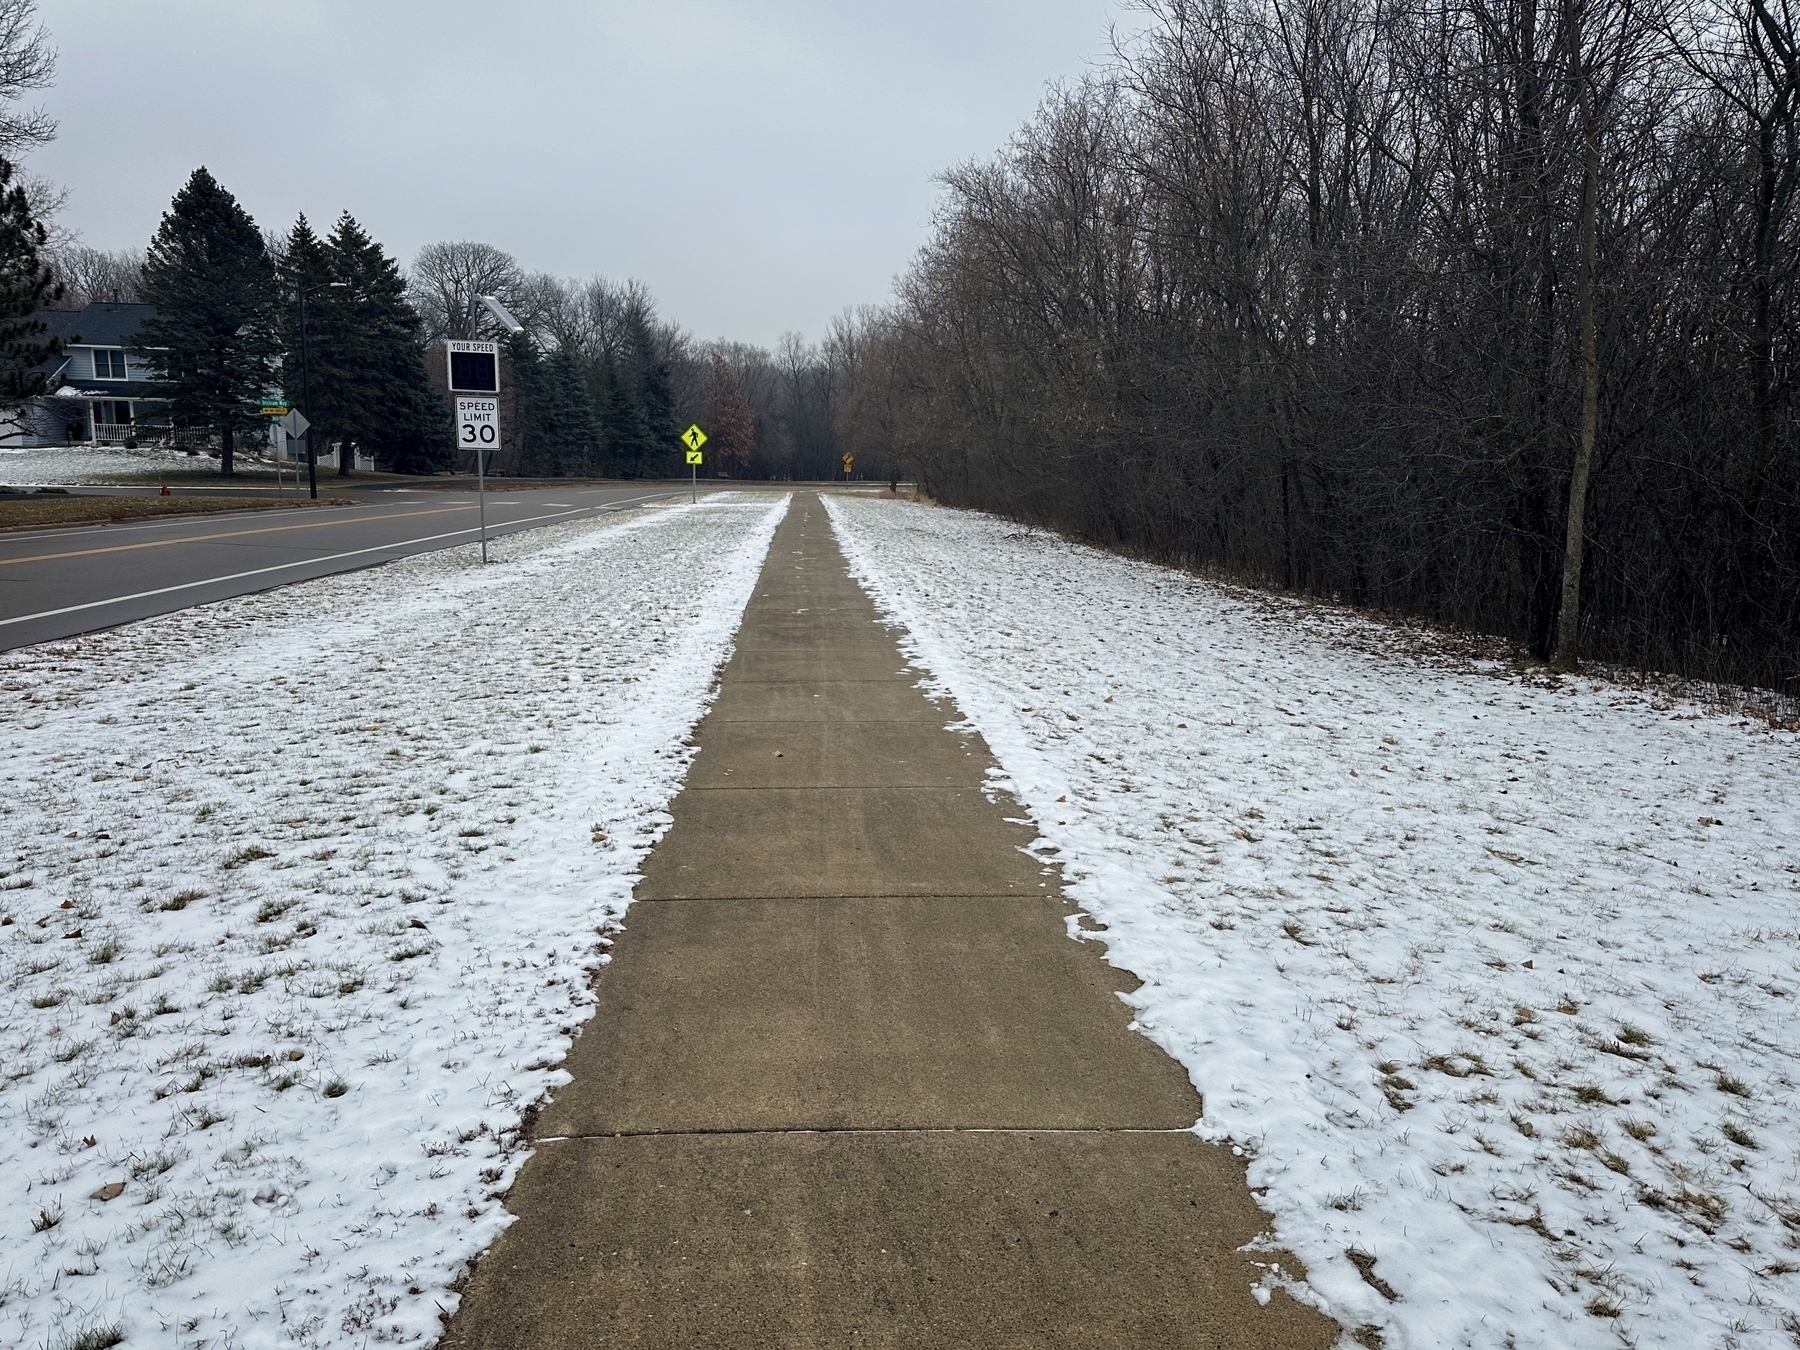 sidewalk flanked by grassy areas covered in snow, with a speed limit sign to the left and bare trees in the background